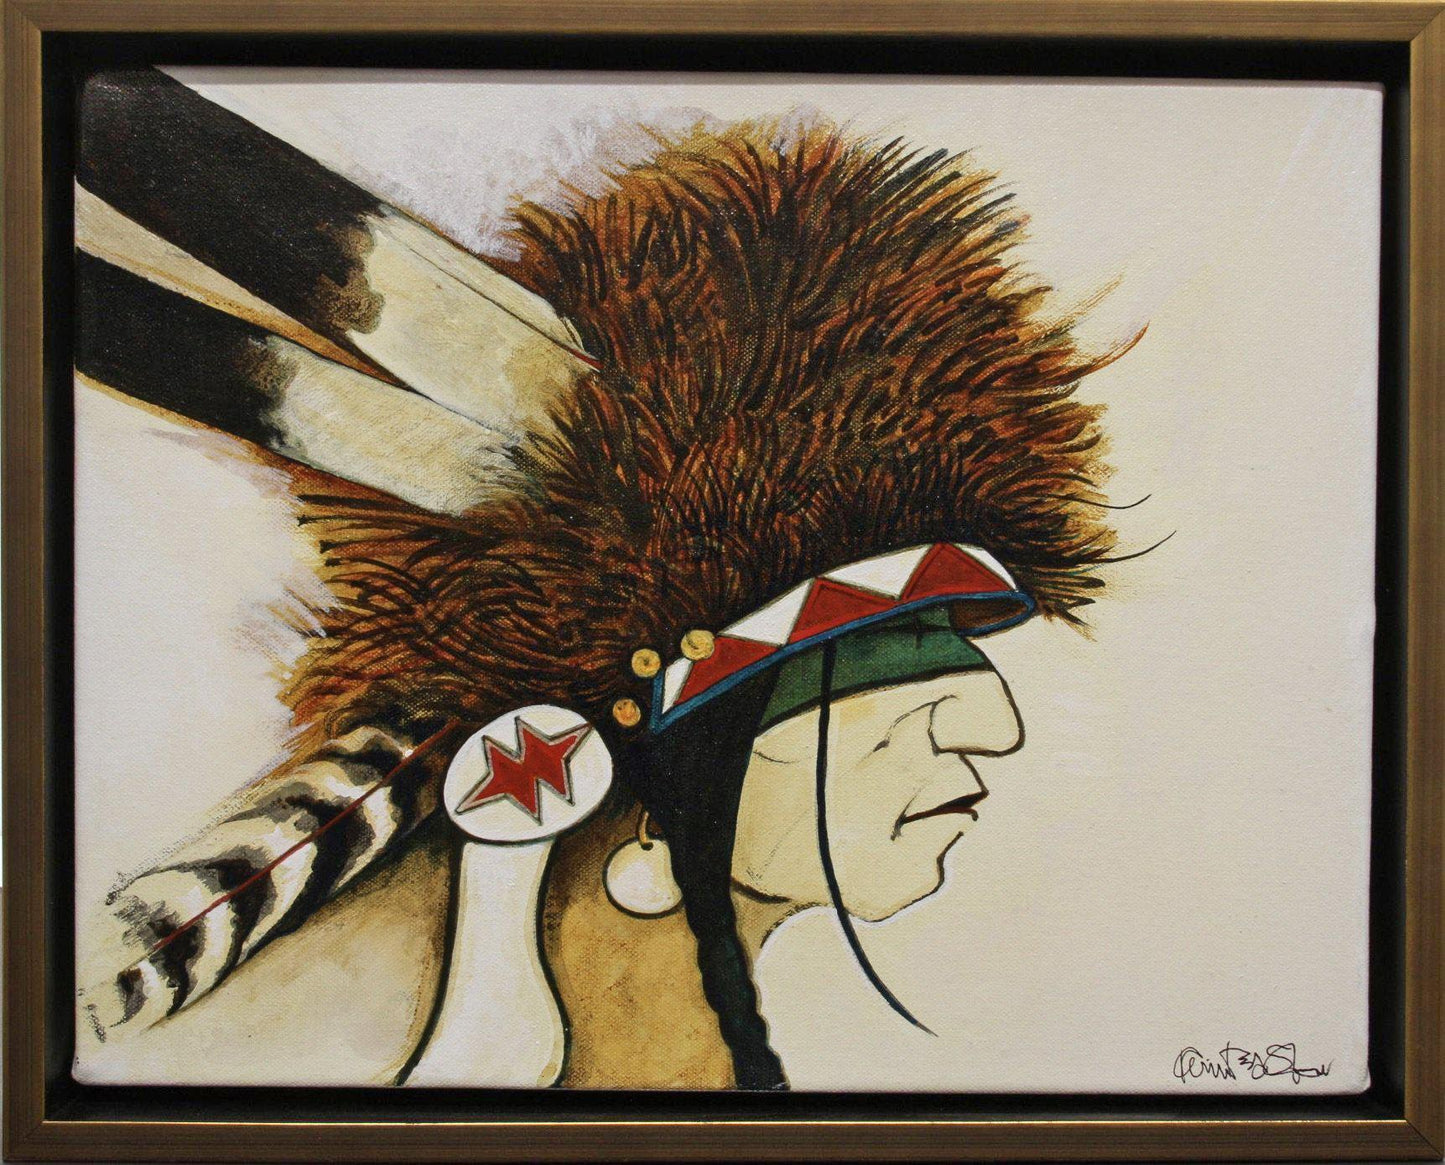 Crow Indian Man - White Clay-Painting-Kevin Red Star-Sorrel Sky Gallery